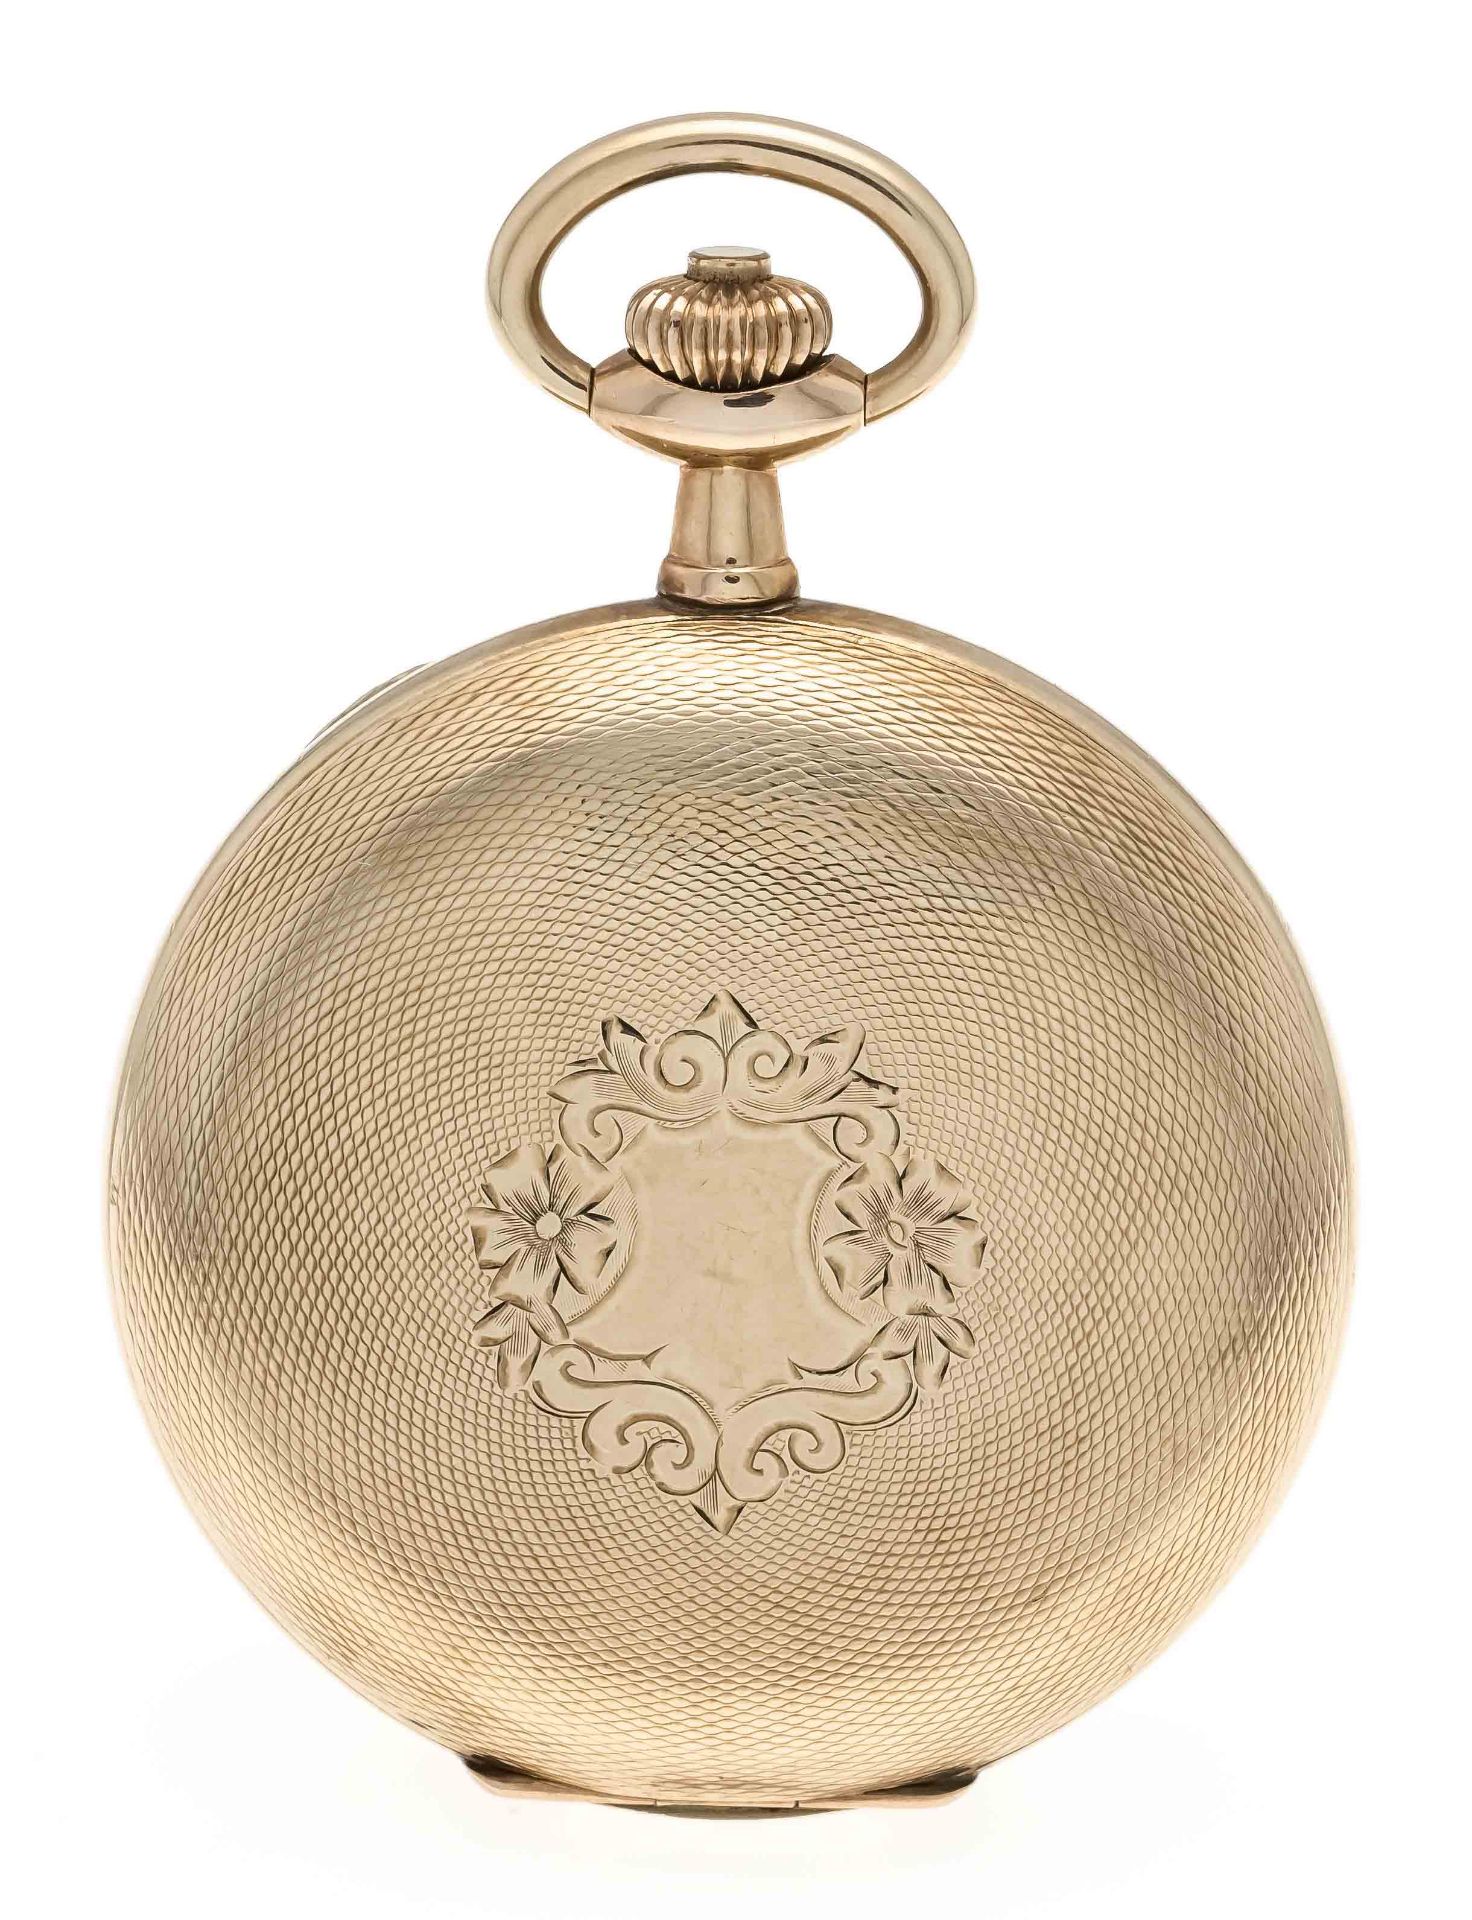 Omega gentleman's pocket watch, circa 1890, sprung cover case goldfilled from gold-filled and - Image 3 of 3